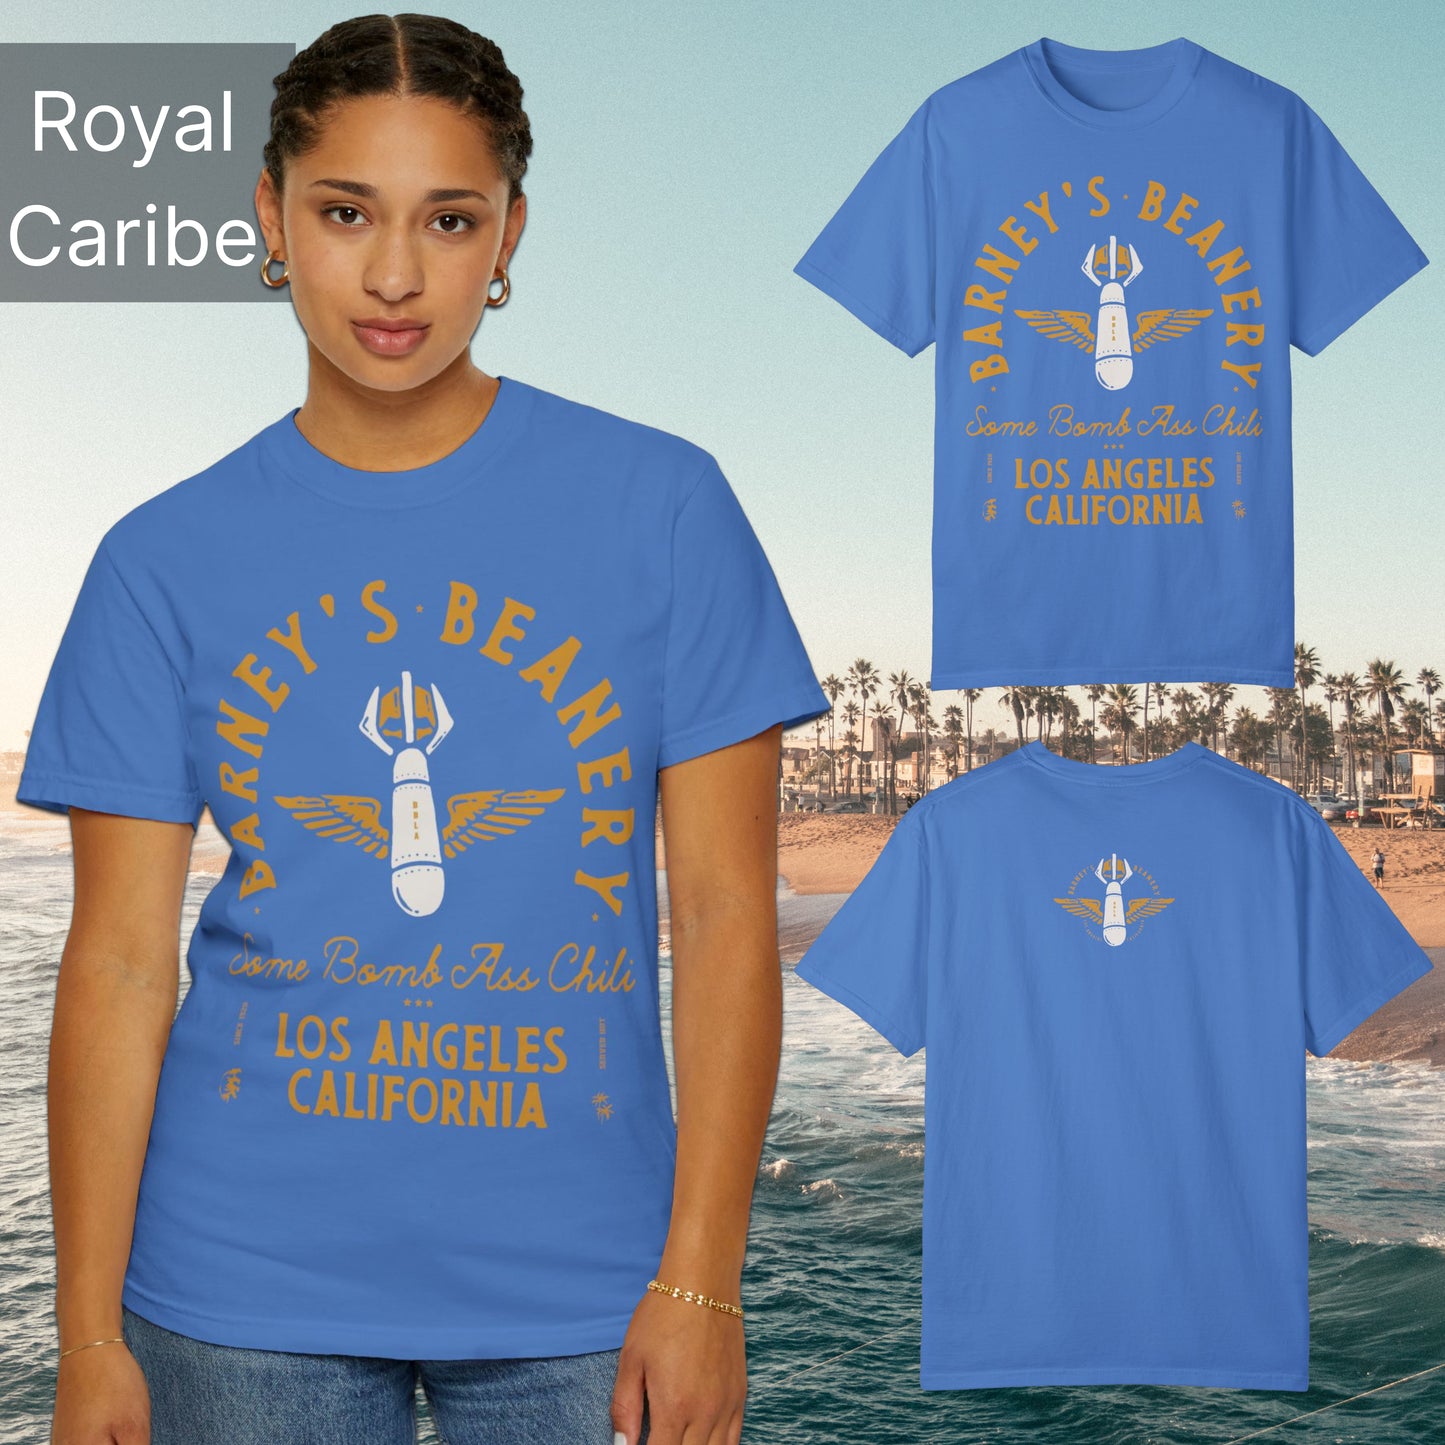 Some Bomb Ass Chili | BARNEY'S BEANERY - Women's Graphic Tee | Royal Caribe Comfort Colors 1717 T-Shirt - All Graphics On Front And Back Flat Lay View